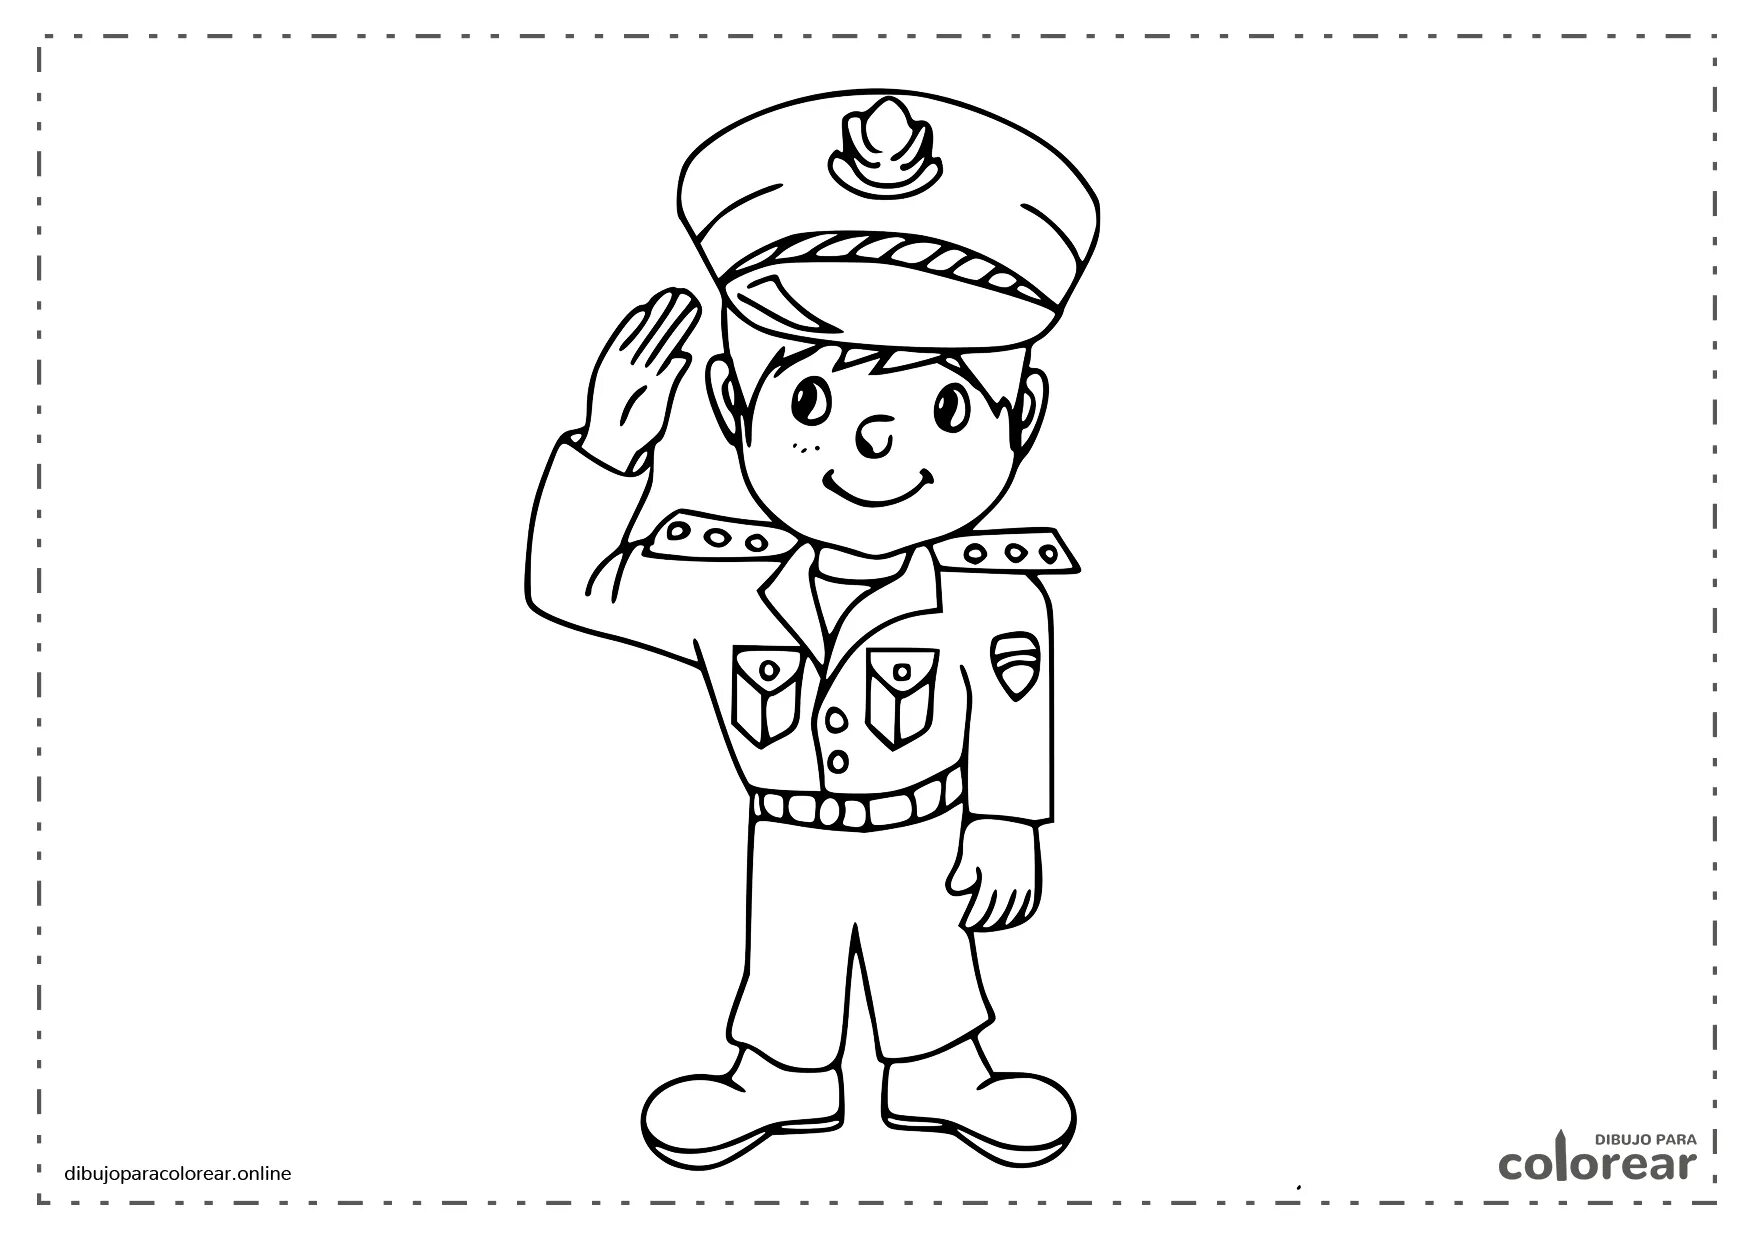 A fun traffic controller coloring page for babies